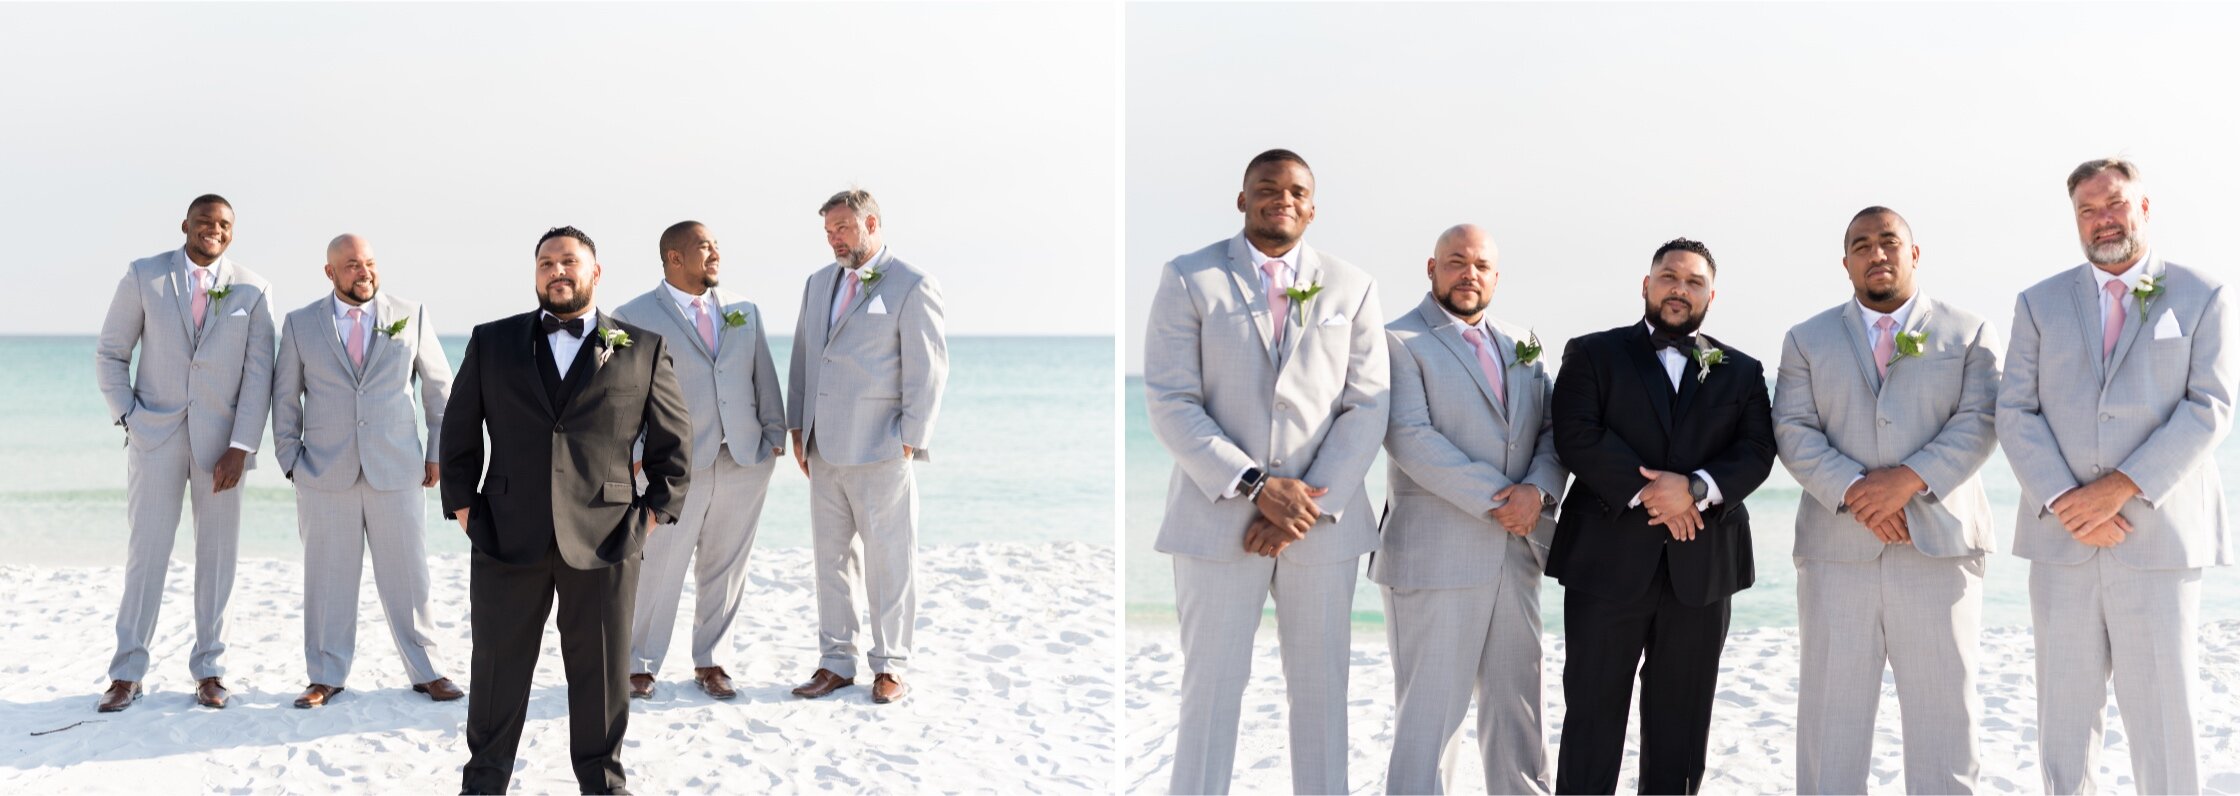 Pensacola Beach Wedding Photography of Bride and Groom on the beach at a beach condo photographed by Kristen Marcus Photography